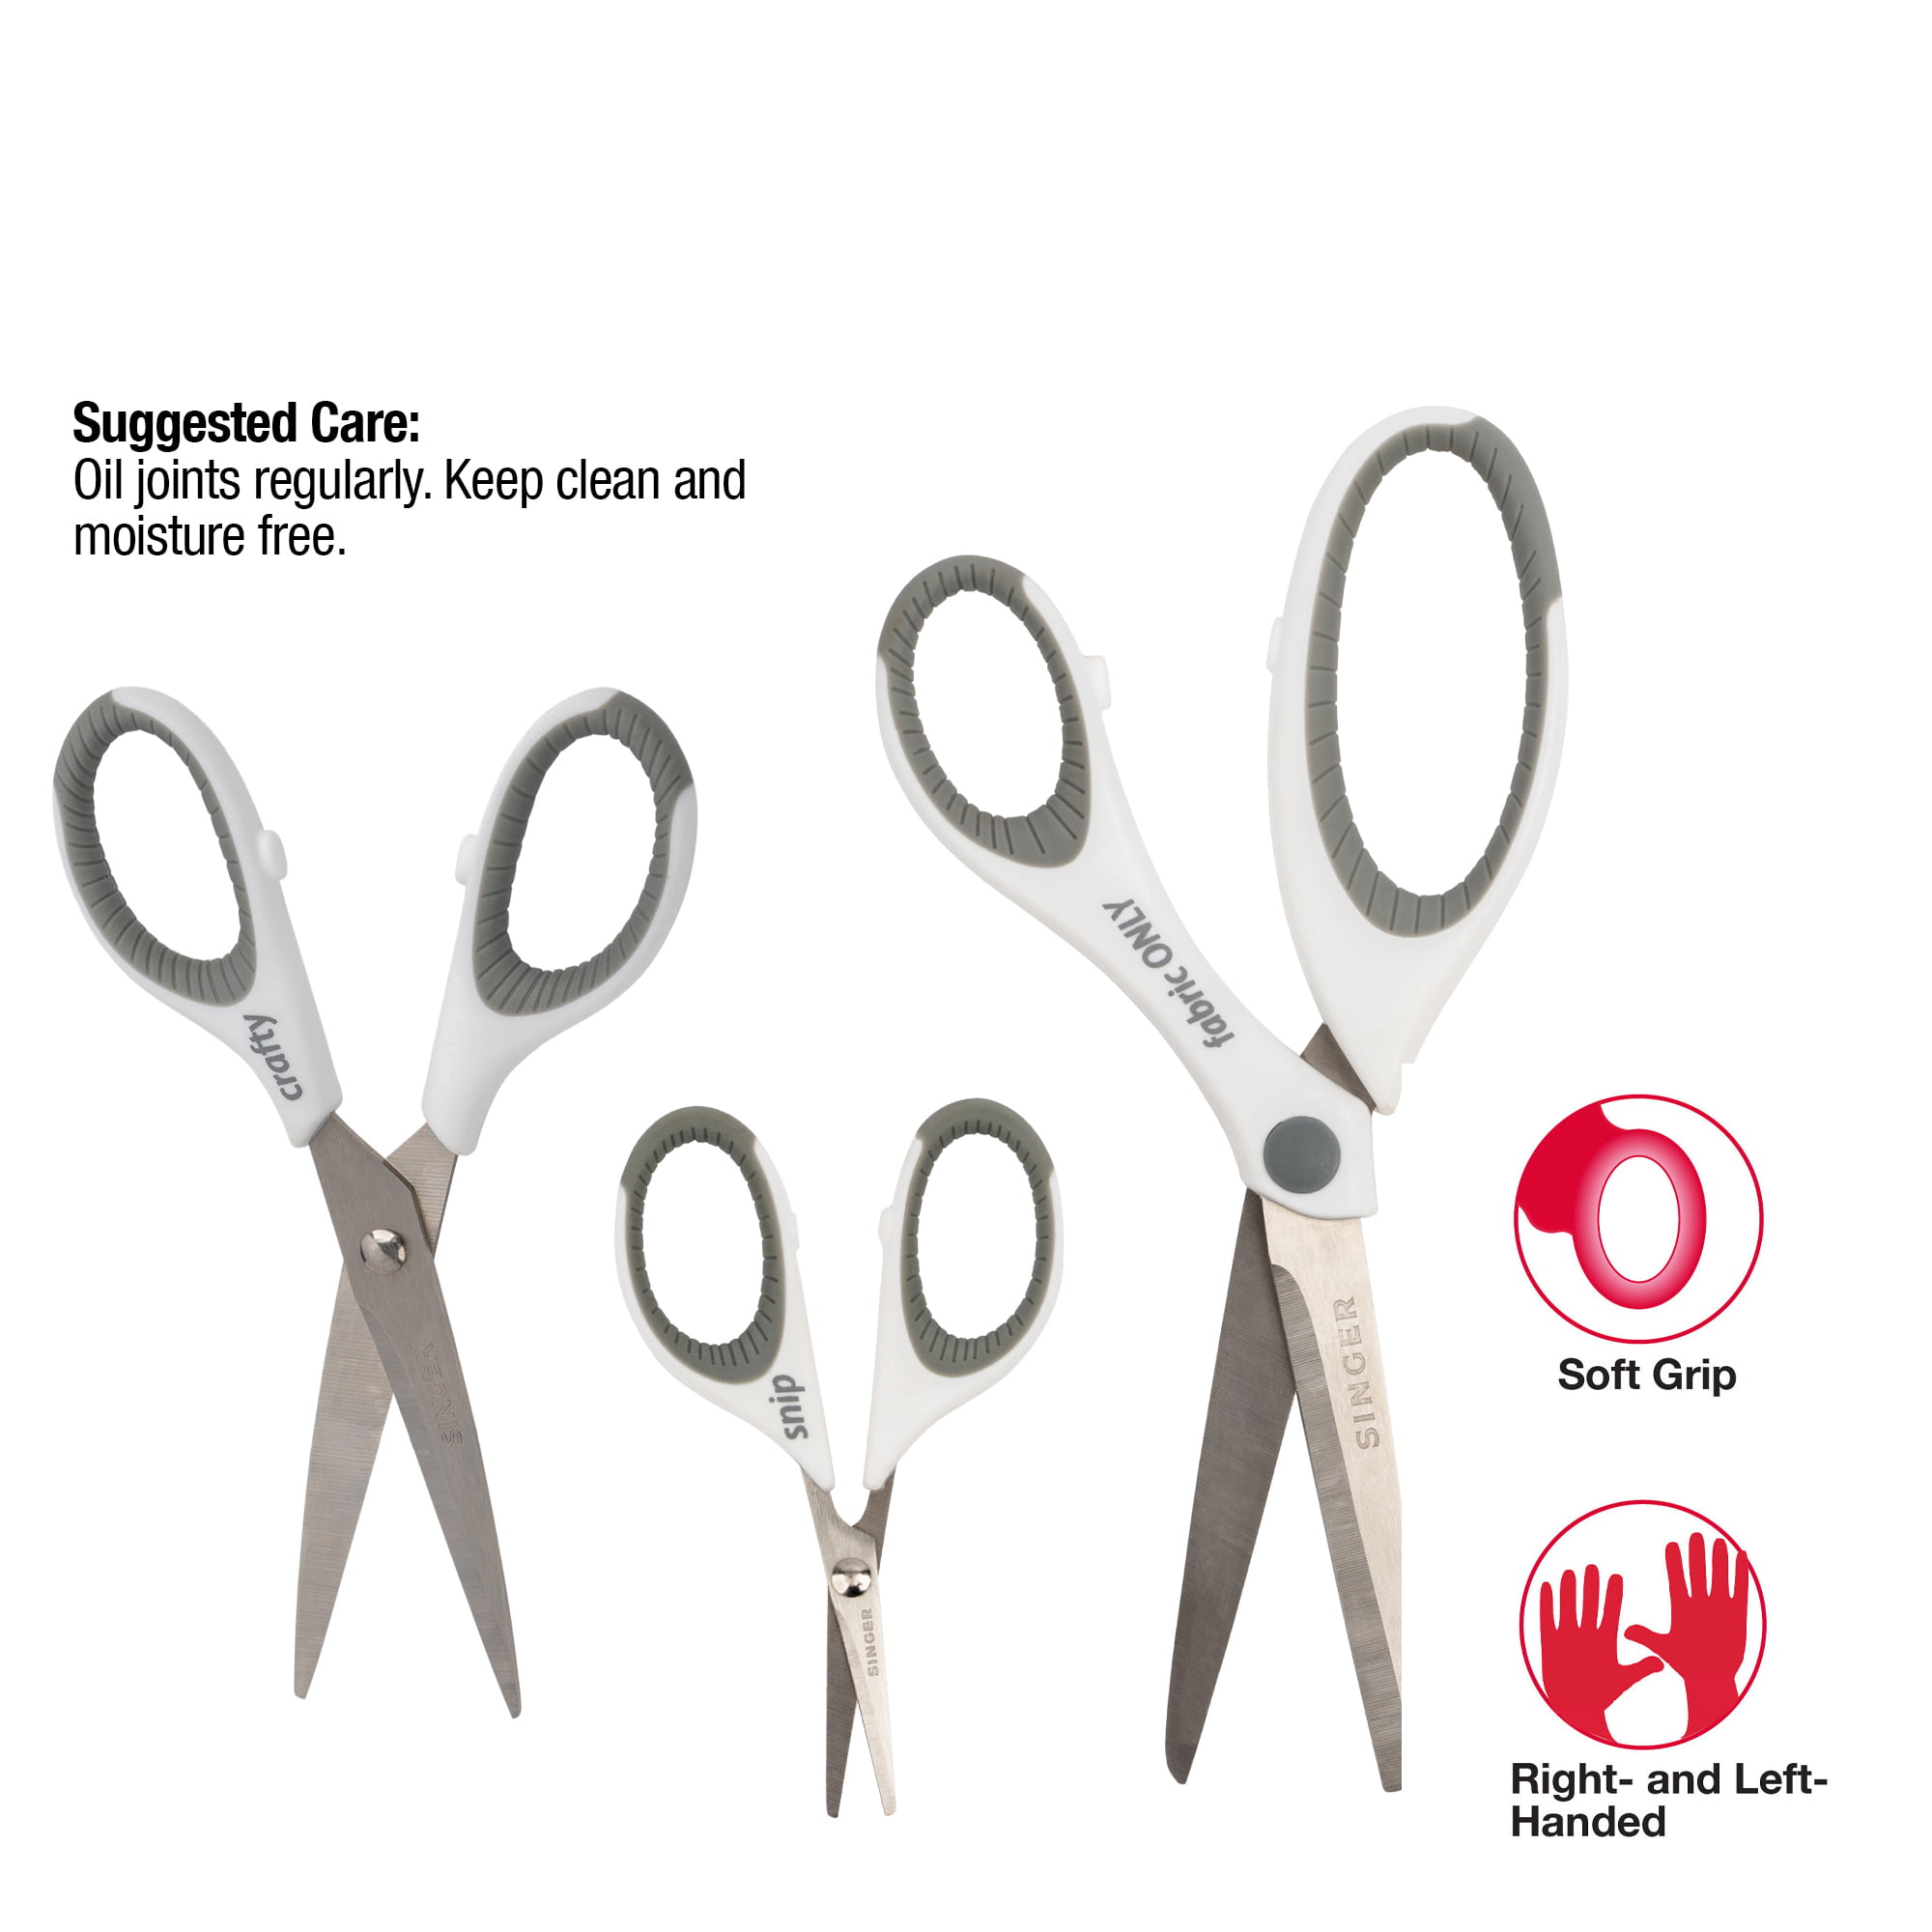 SINGER 8.5” Fabric Scissors and 4.75” Craft Scissors Pack by Singer